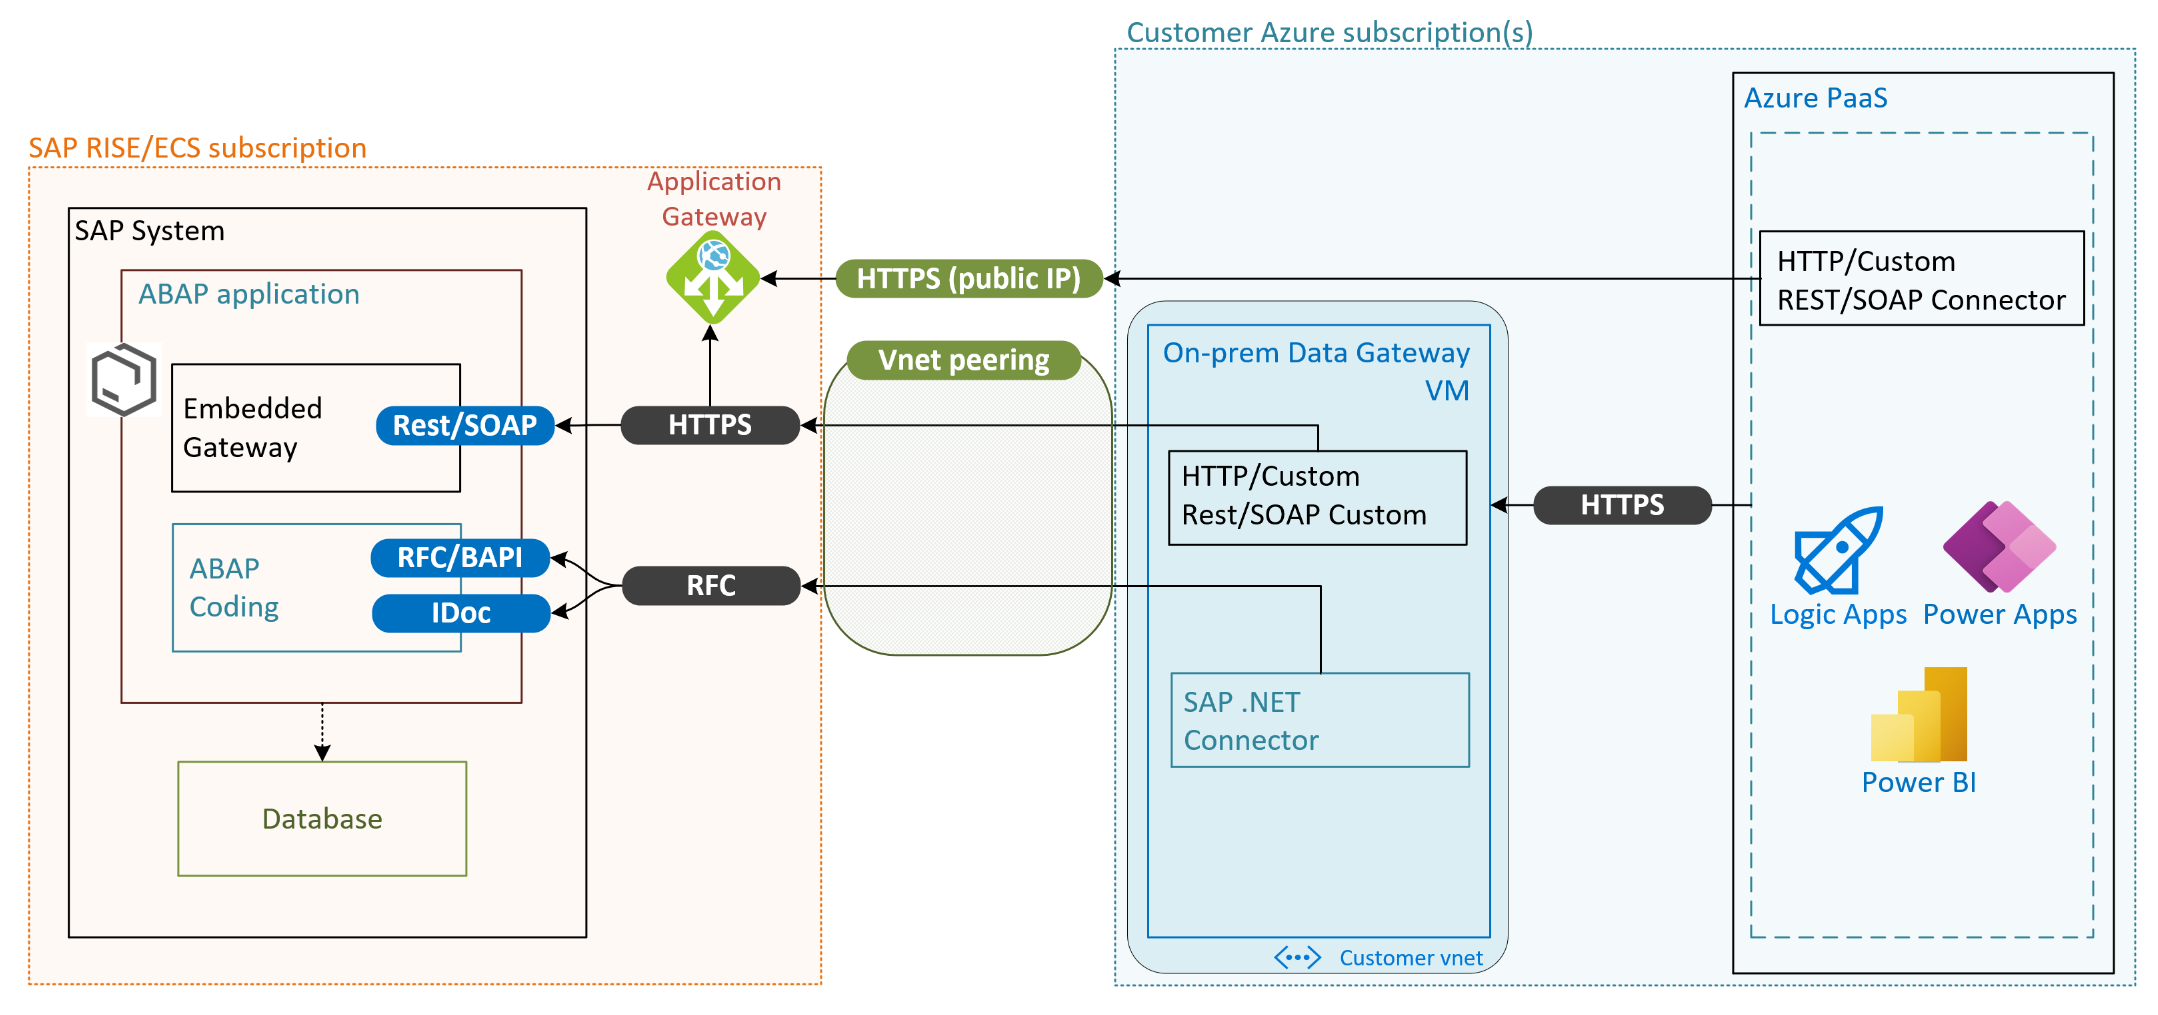 SAP RISE/ECS accessed from Azure on-premises data gateway and connected Azure services.